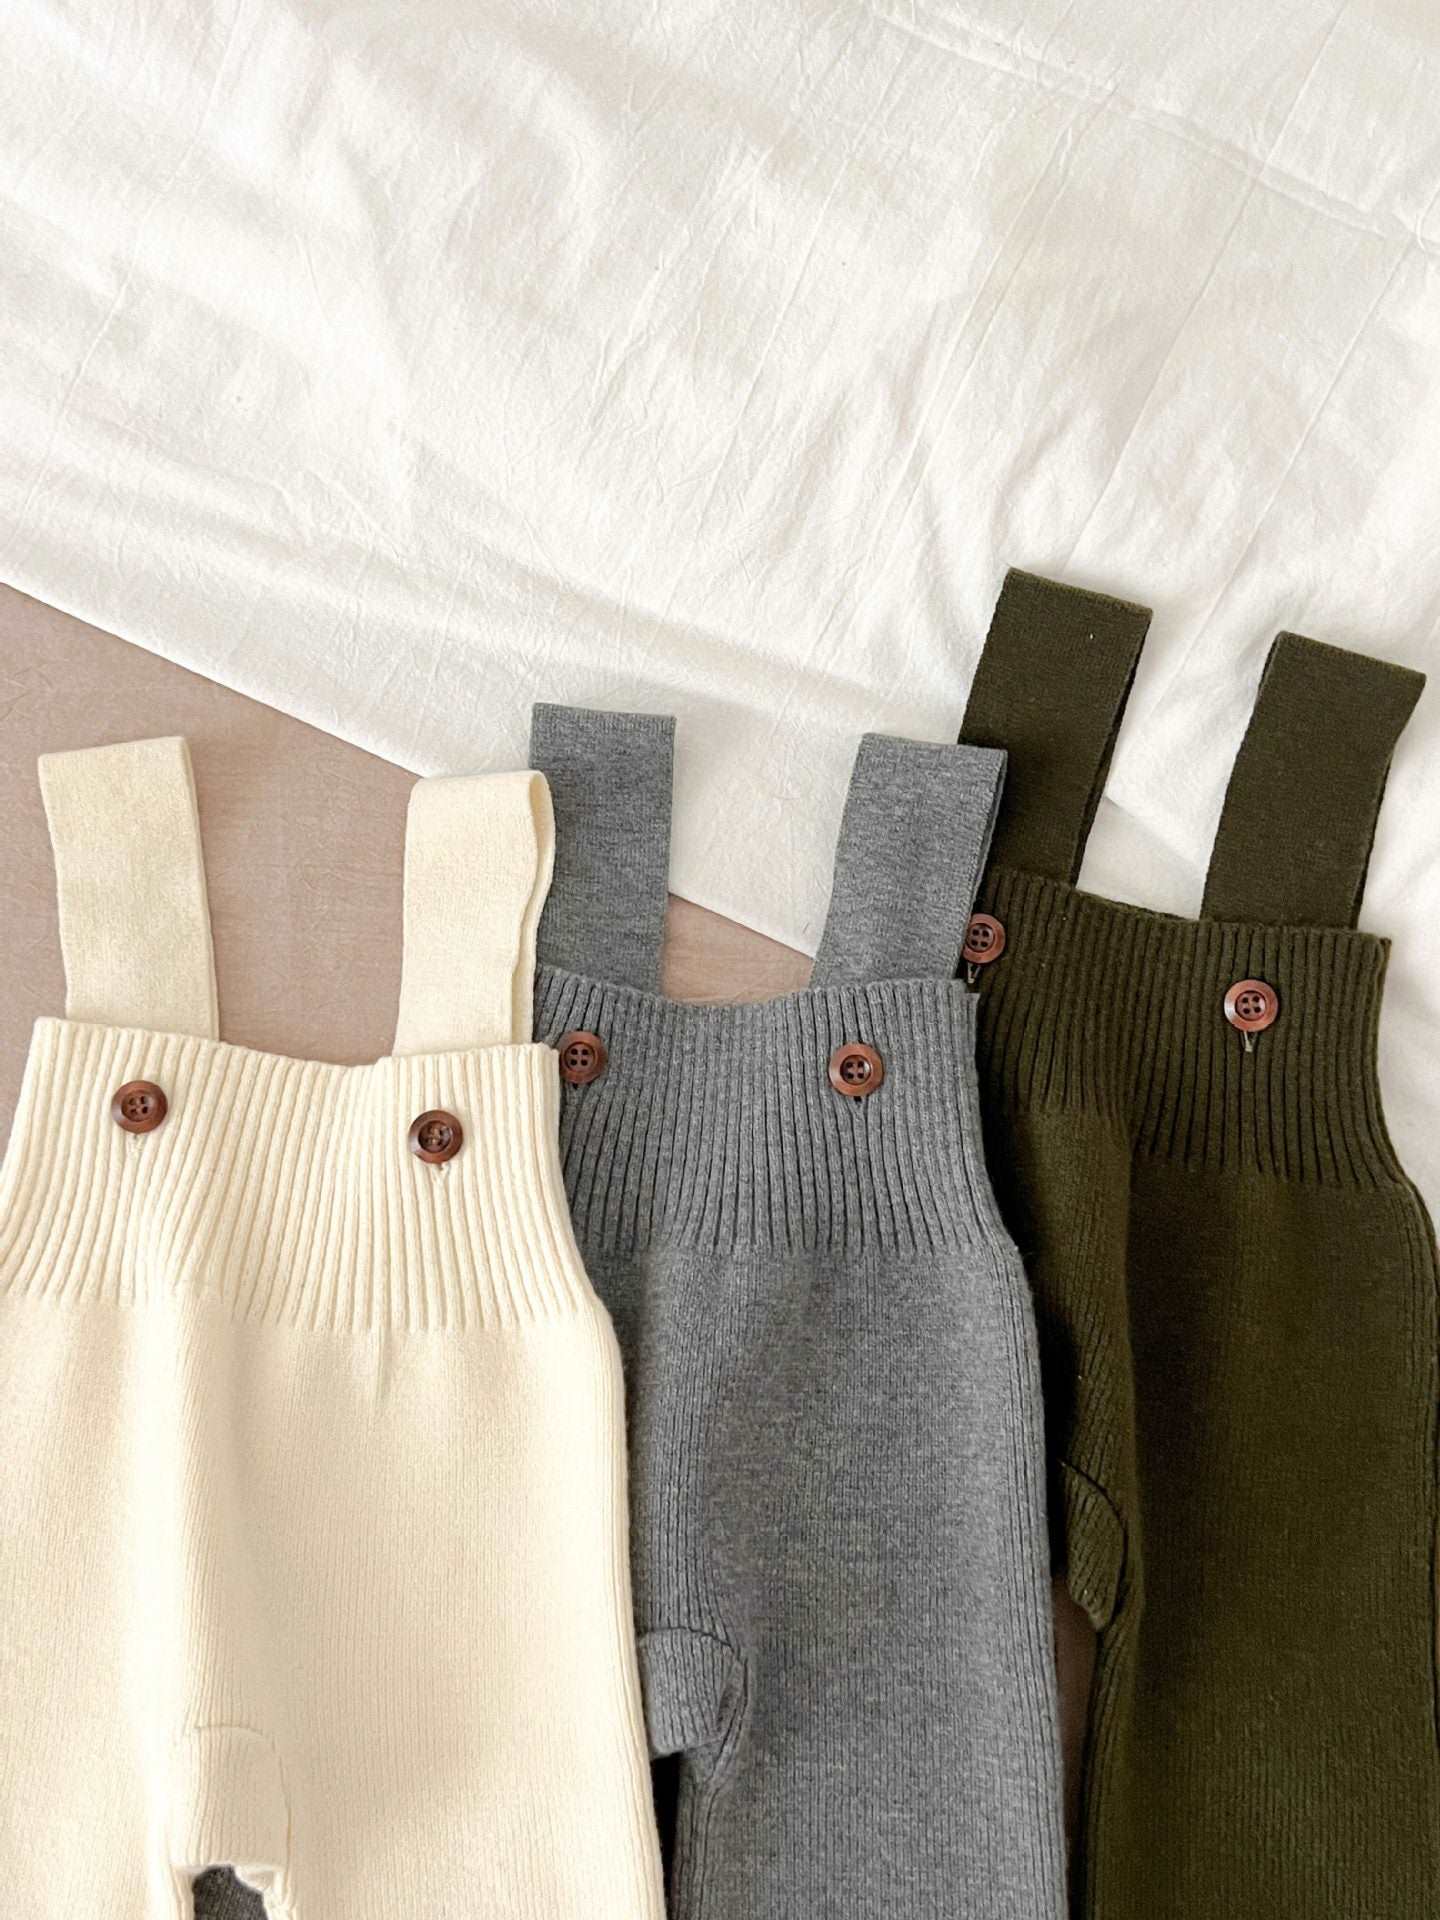 Solid Knit Overalls || Camel + 6 more colors...